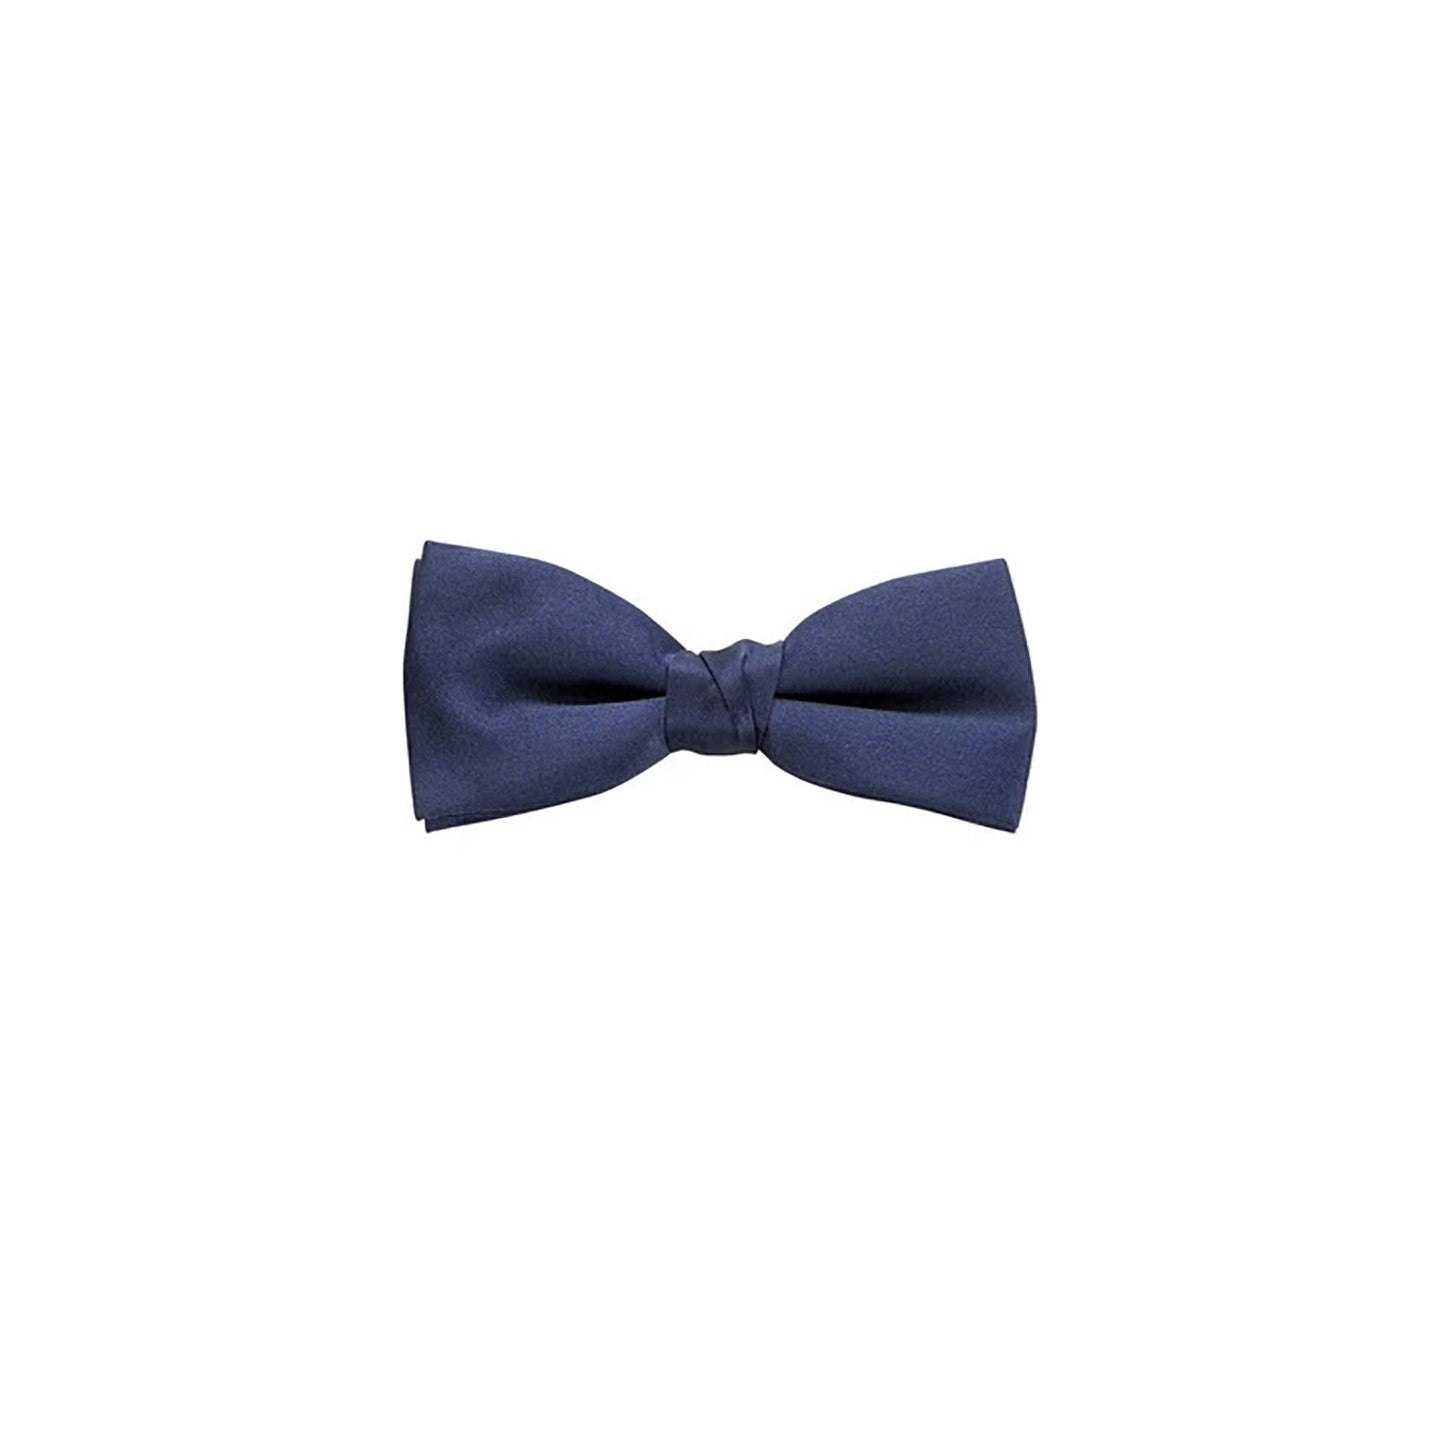 Poly/Satin Bow Tie - 6 Colors